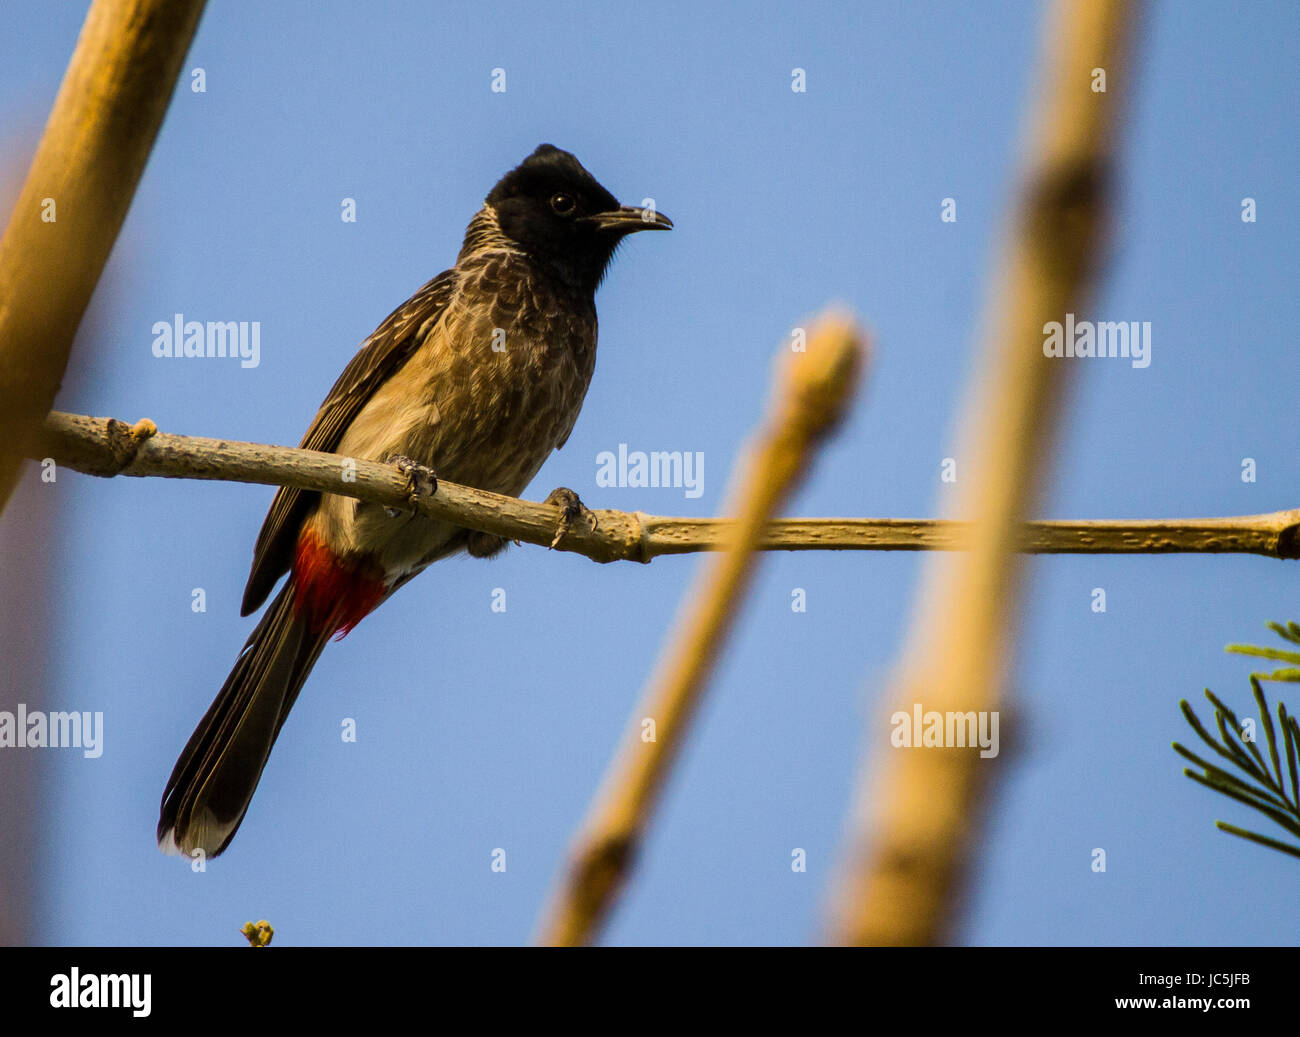 The red-vented bulbul (Pycnonotus cafer) is a member of the bulbul family of passerines. It is resident breeder across the Indian subcontinent. Stock Photo